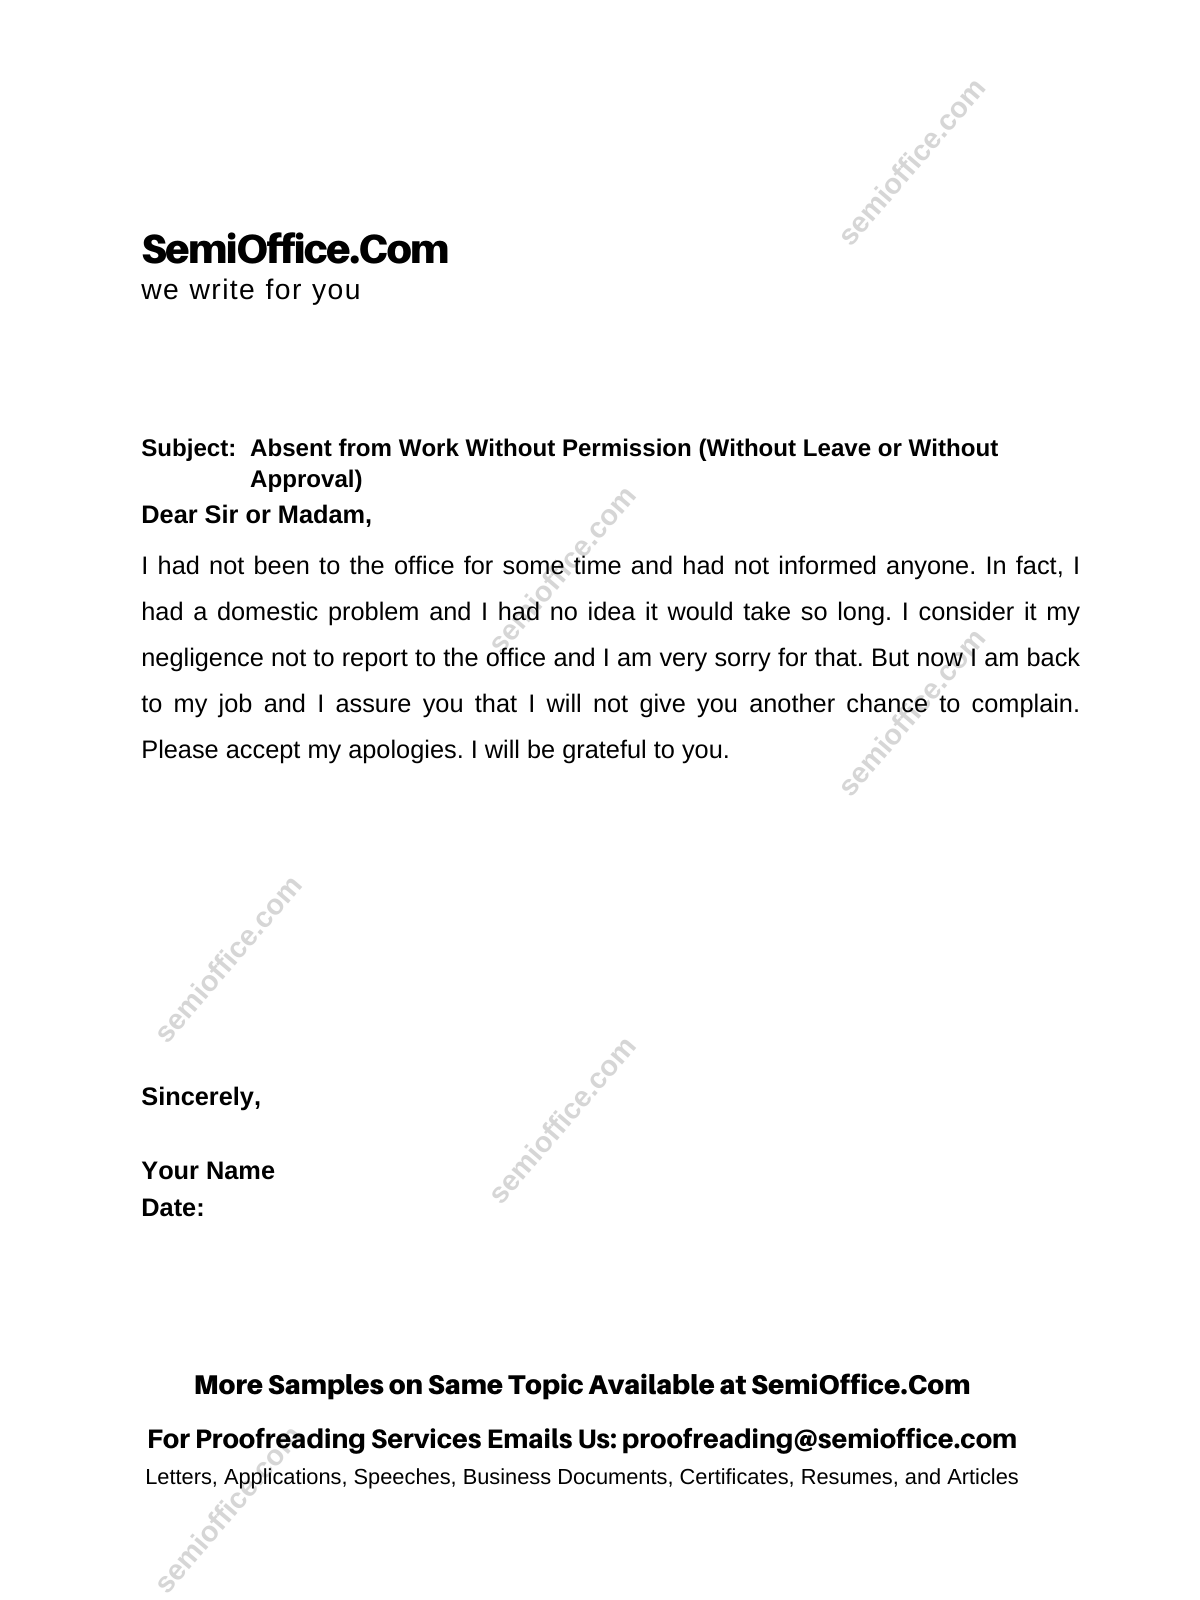 Absent From Work Explanation Letter SemiOffice Com